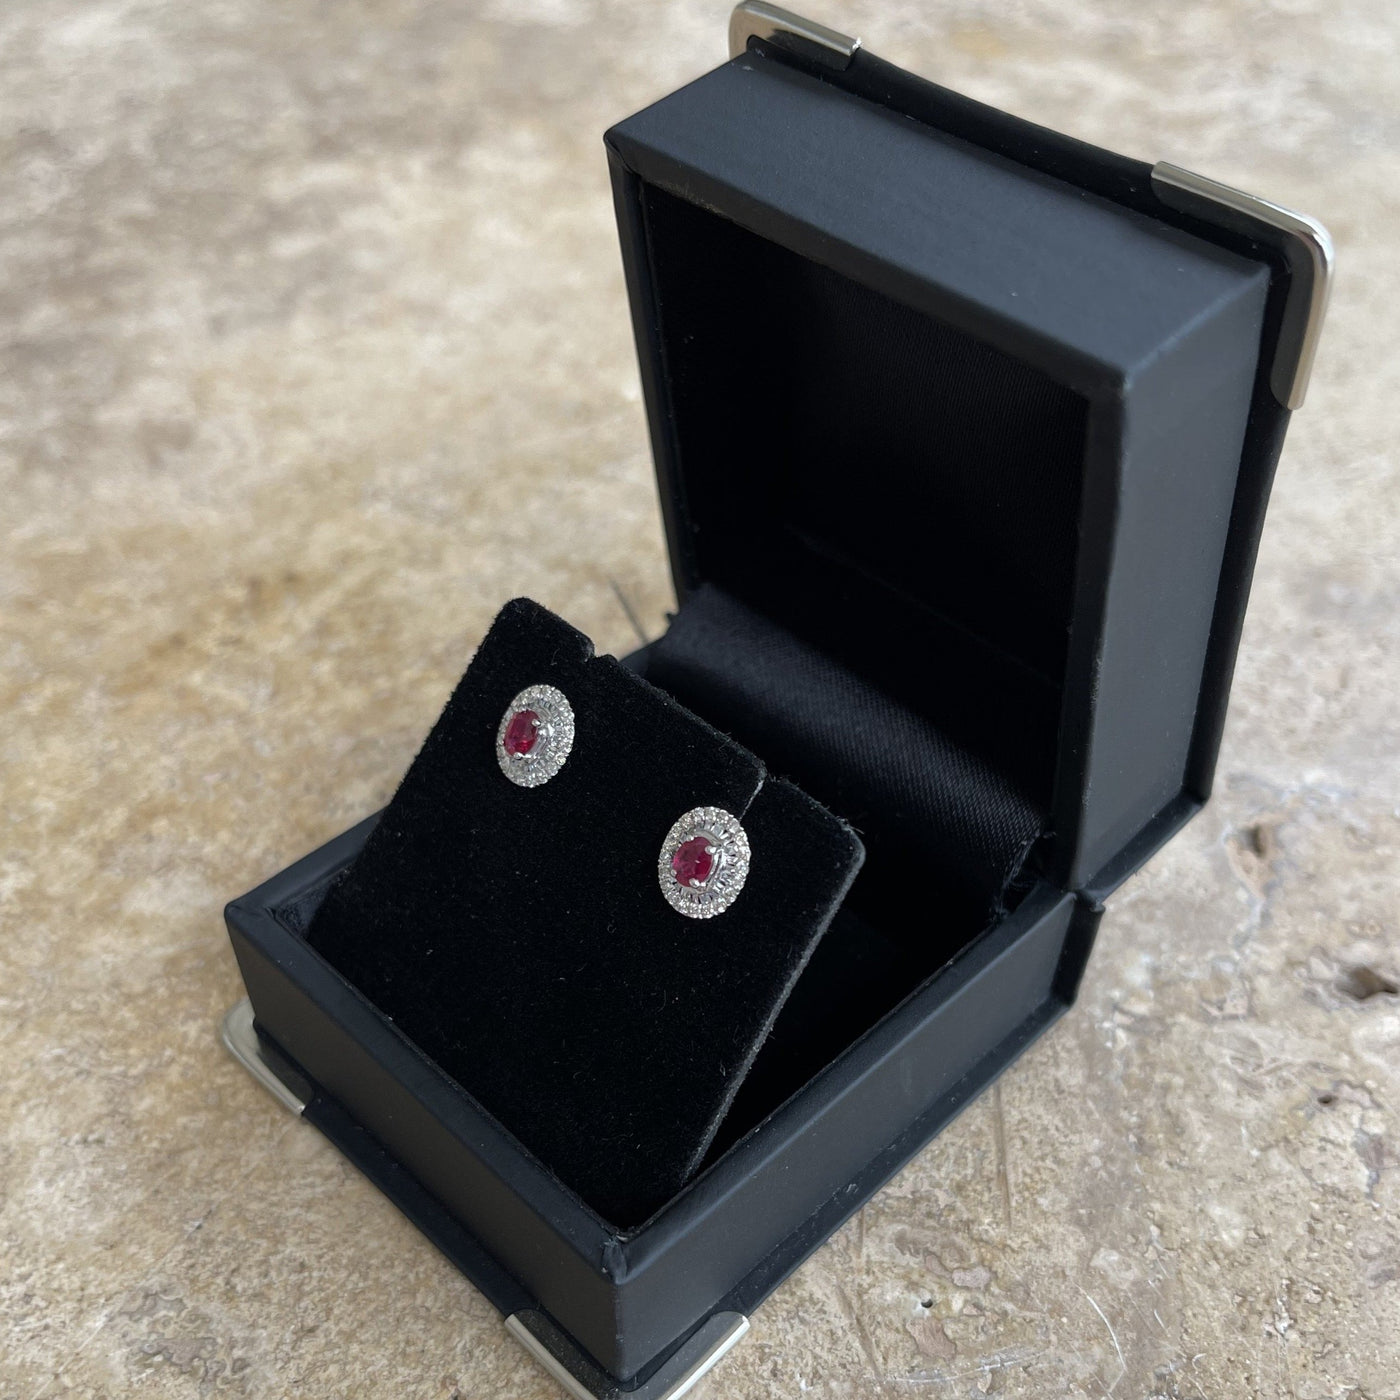 18CT White Gold Ruby and Diamond Earring Studs